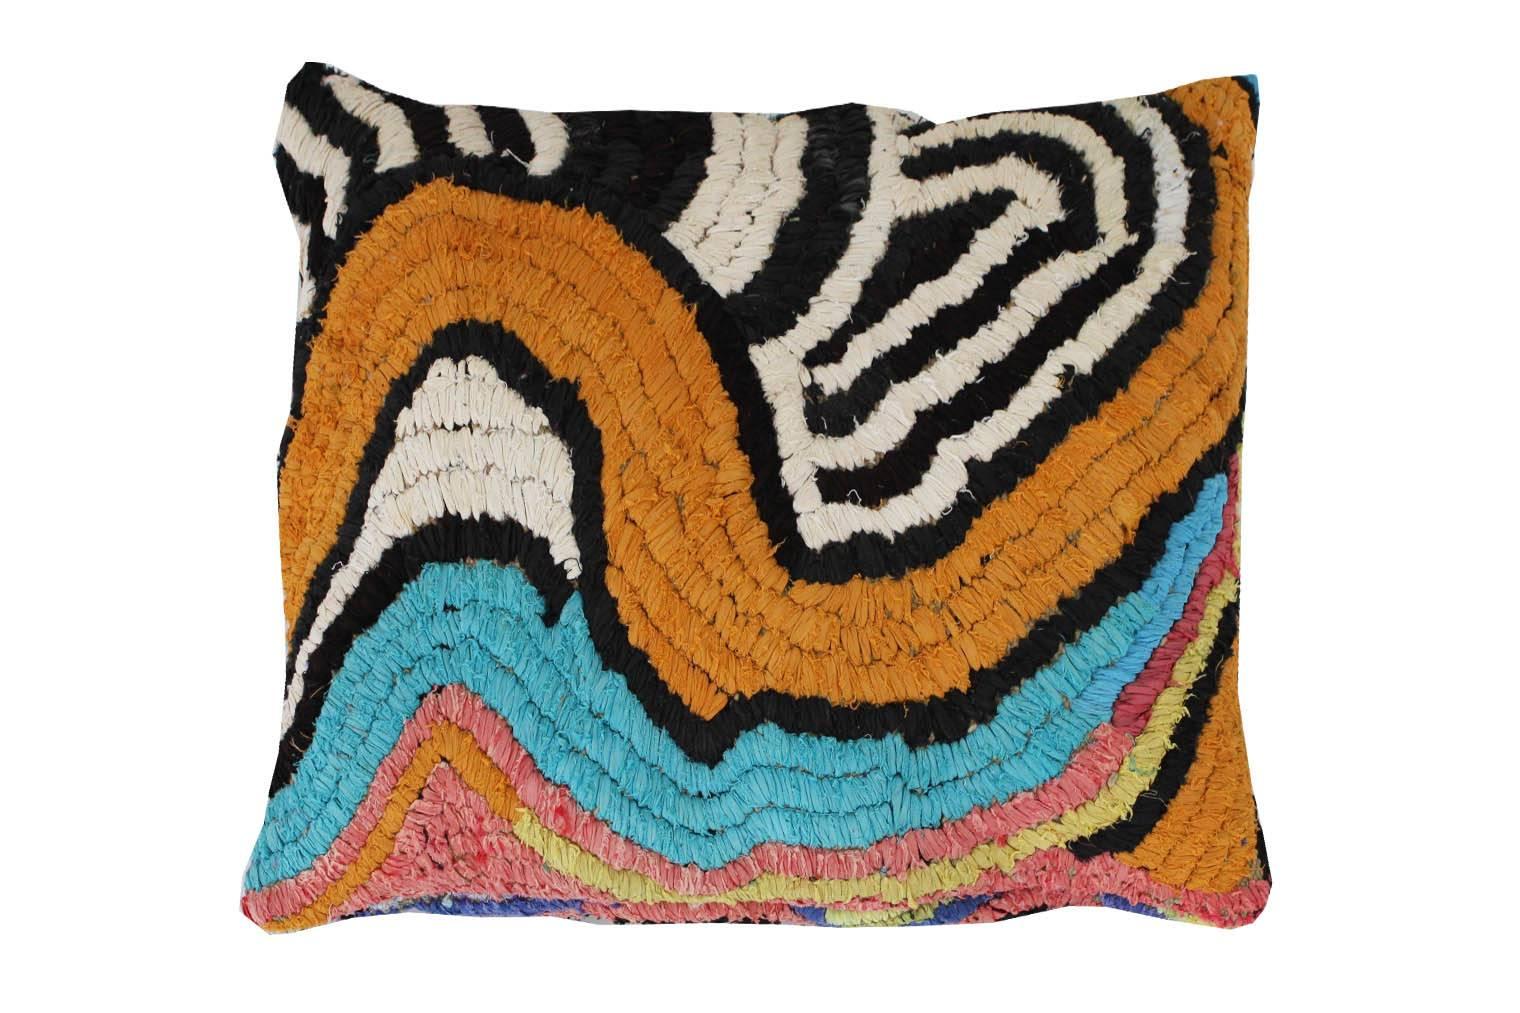 Floor pillow made with vintage Moroccan textile rug.
This pillow is black, cream and green with accents in pink, orange, aqua, blue, purple, and chartreuse.
Measures: 28" L x 25" W.